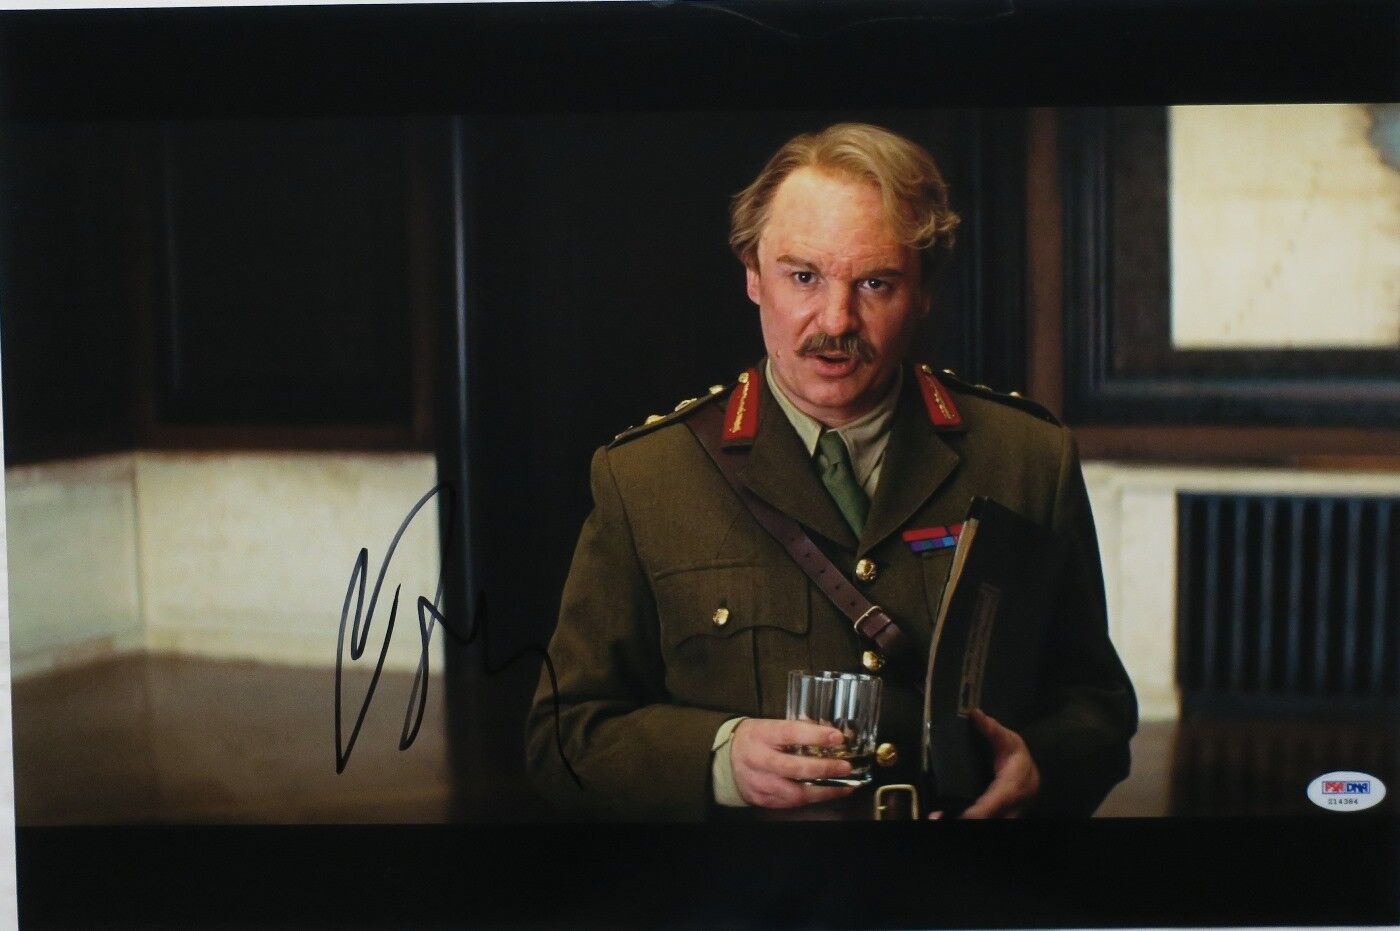 Mike Myers Signed Inglourious Basterds Autographed 12x18 Photo Poster painting PSA/DNA #Z14384